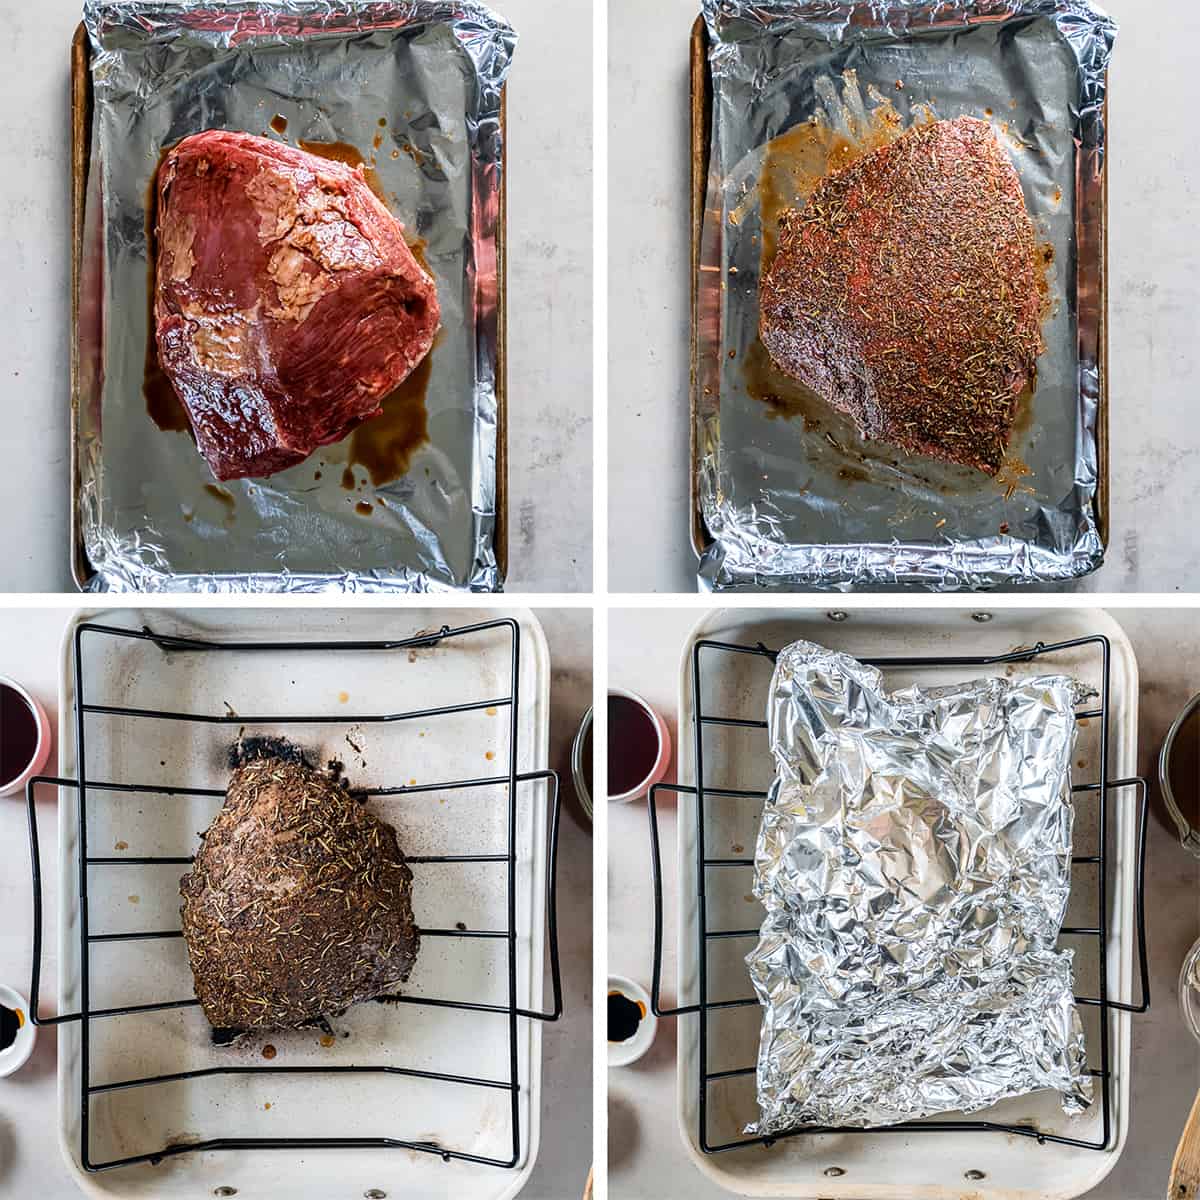 Four images of a cross rib roast in a roasting pan coated with balsamic vinegar and spices and covered with foil after roasting.